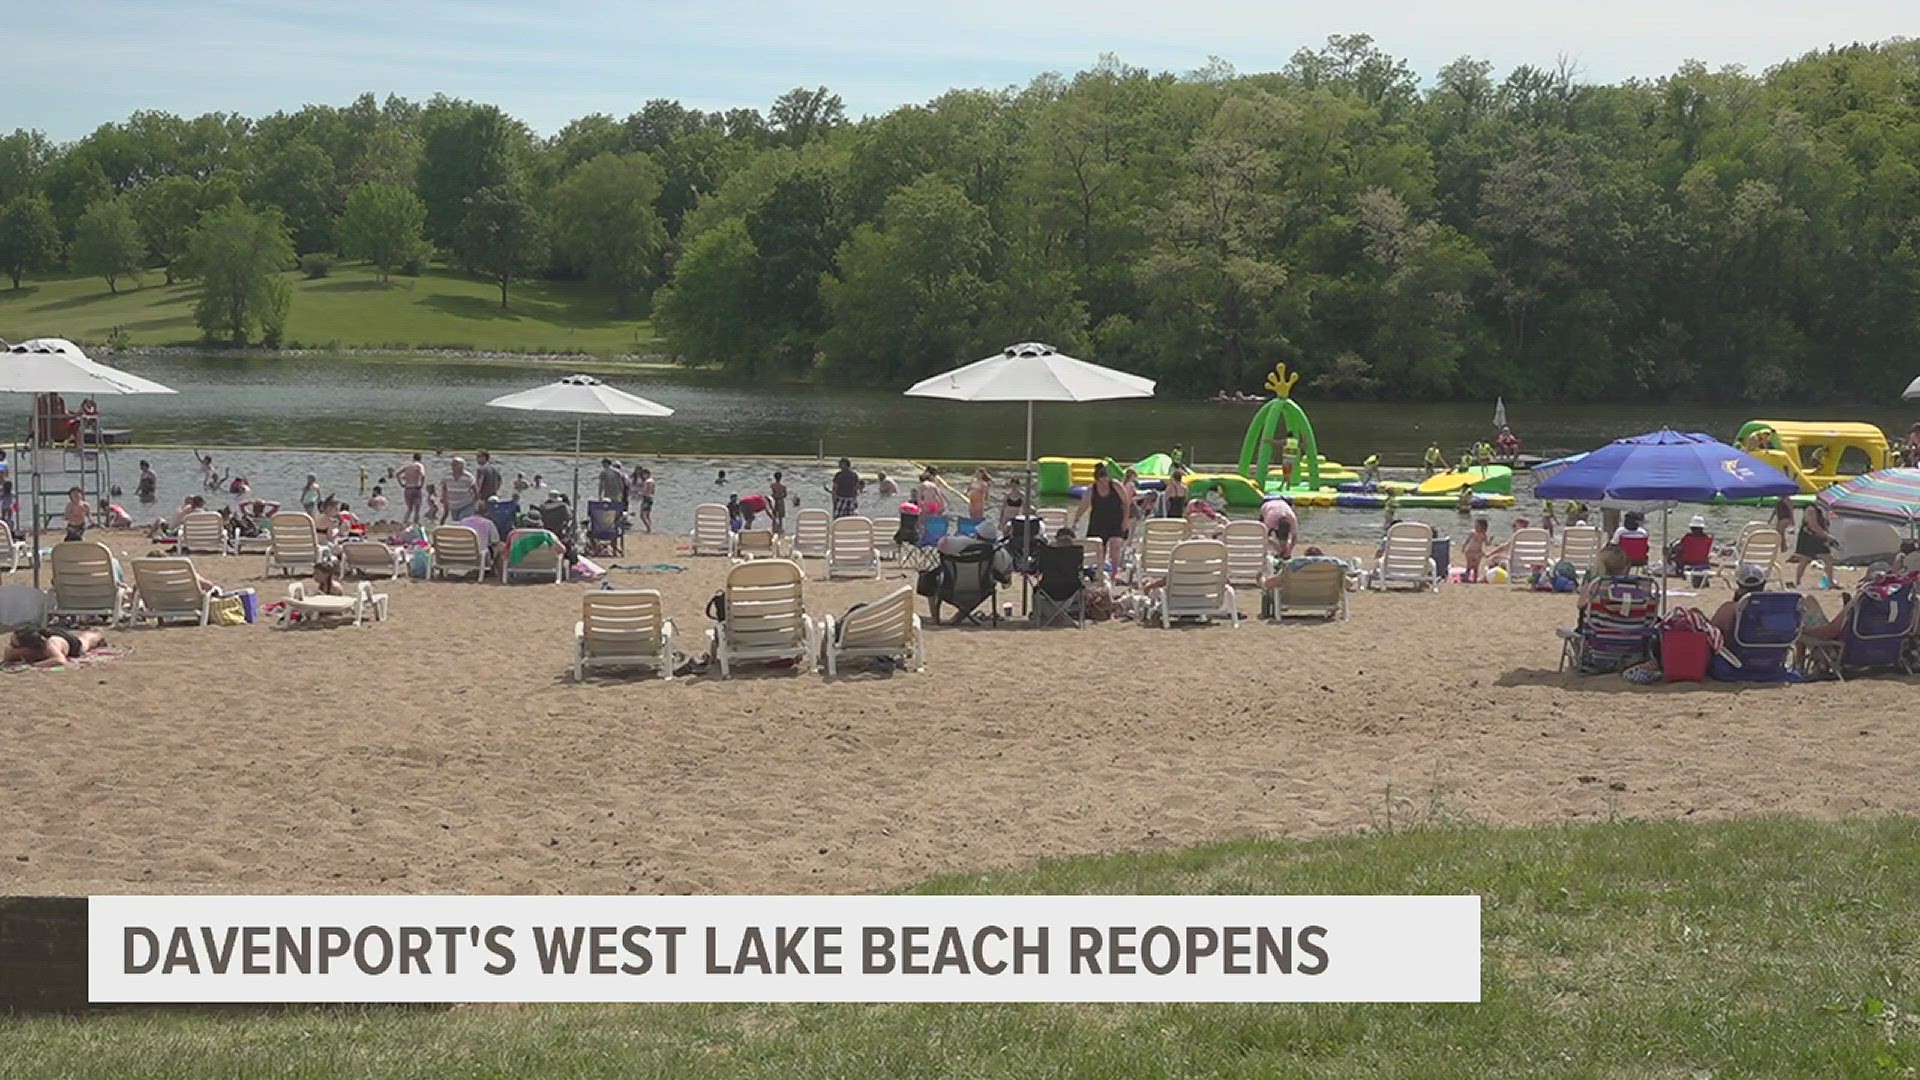 Families and friends got to cool off in the sunny weather as the beach reopened for Memorial Day weekend.